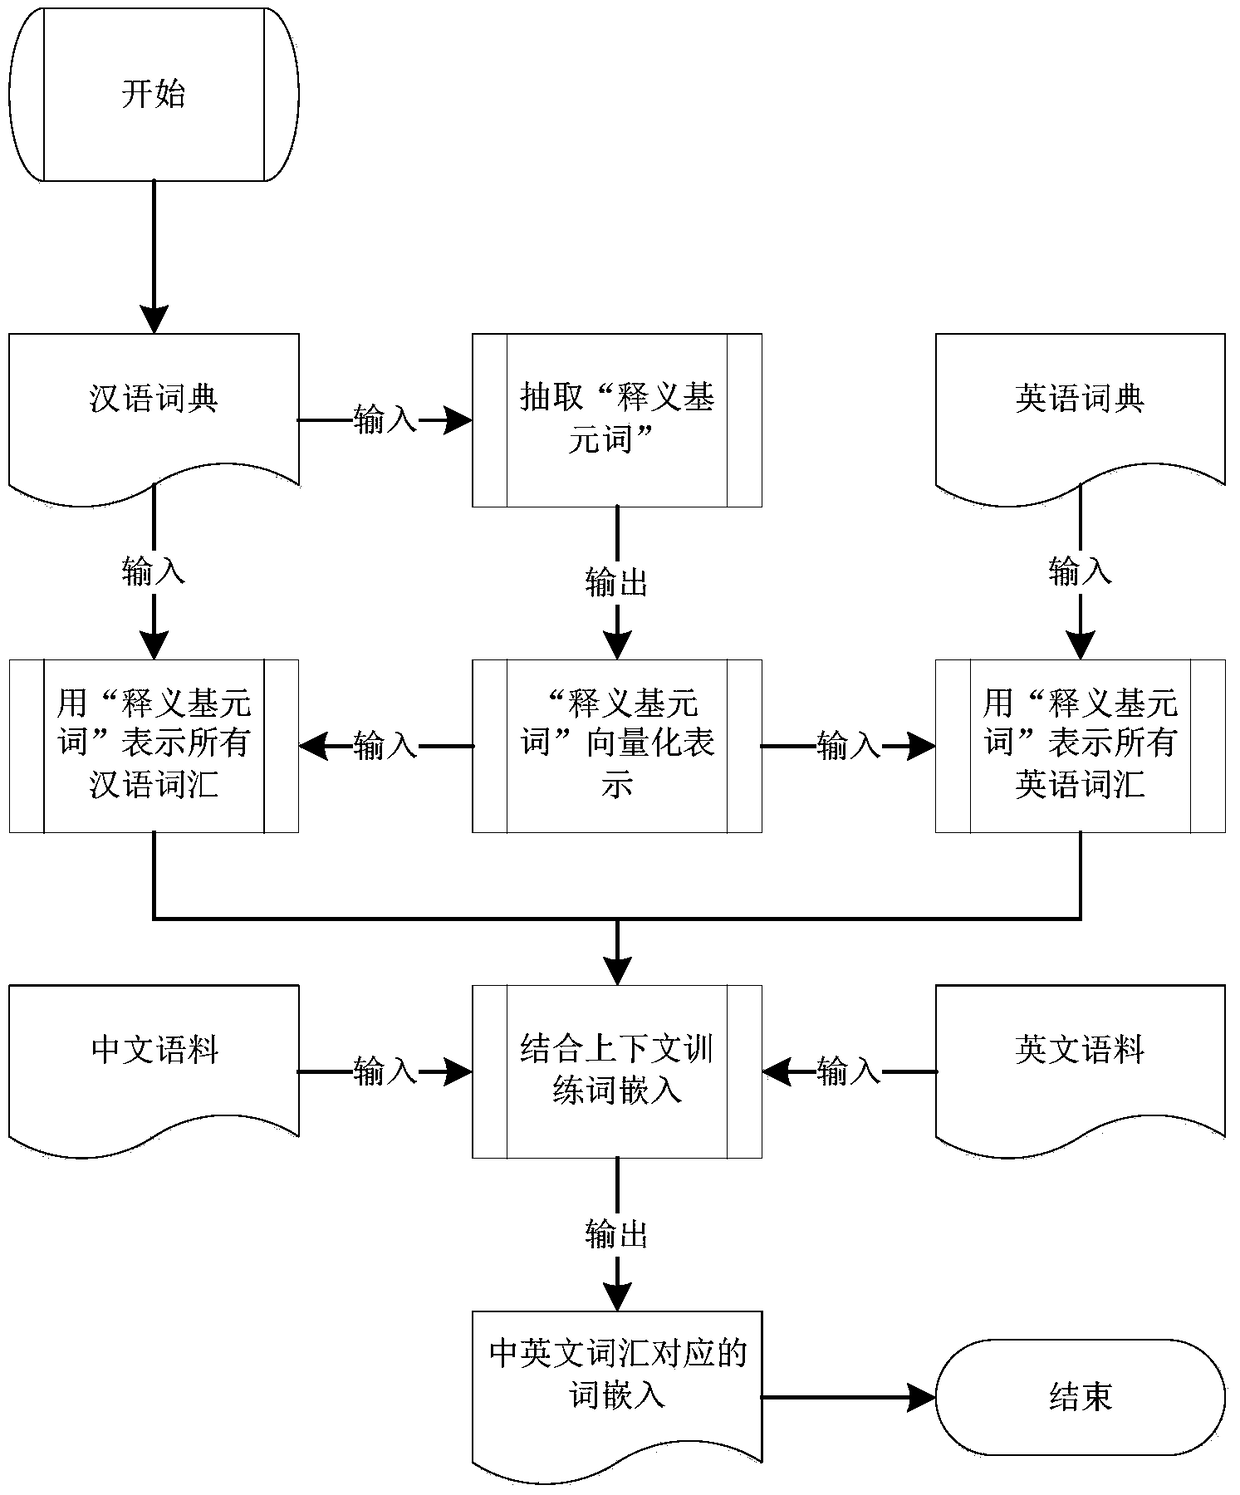 Chinese-English cross-lingual lexical representation learning method and system based on paraphrase primitives